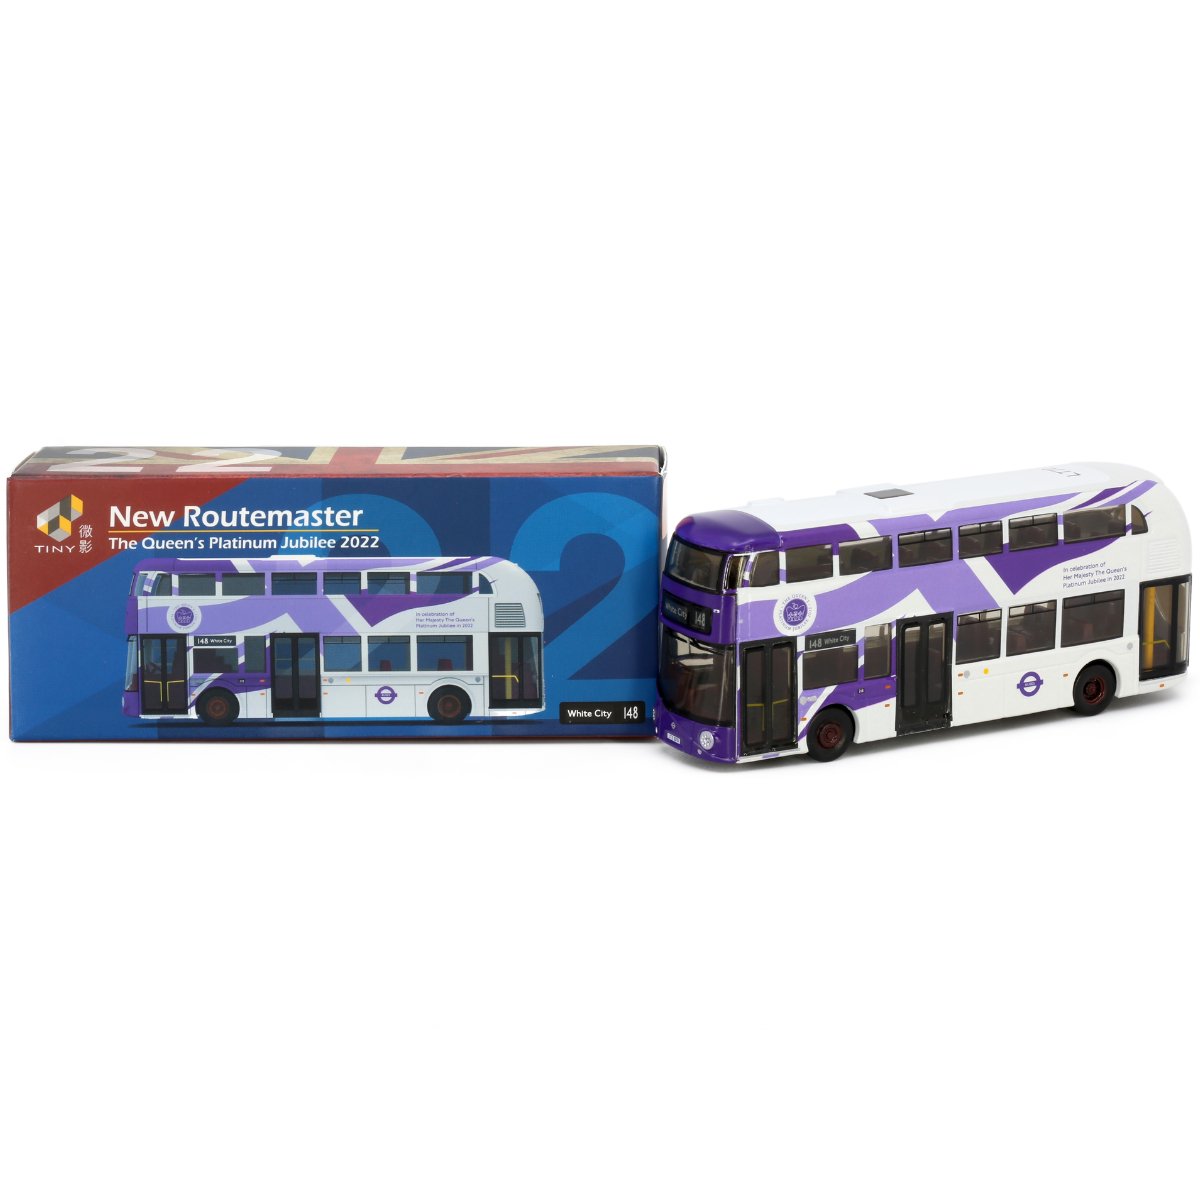 Tiny Models New Routemaster The Queen's Platinum Jubilee (1:110 Scale) - Phillips Hobbies